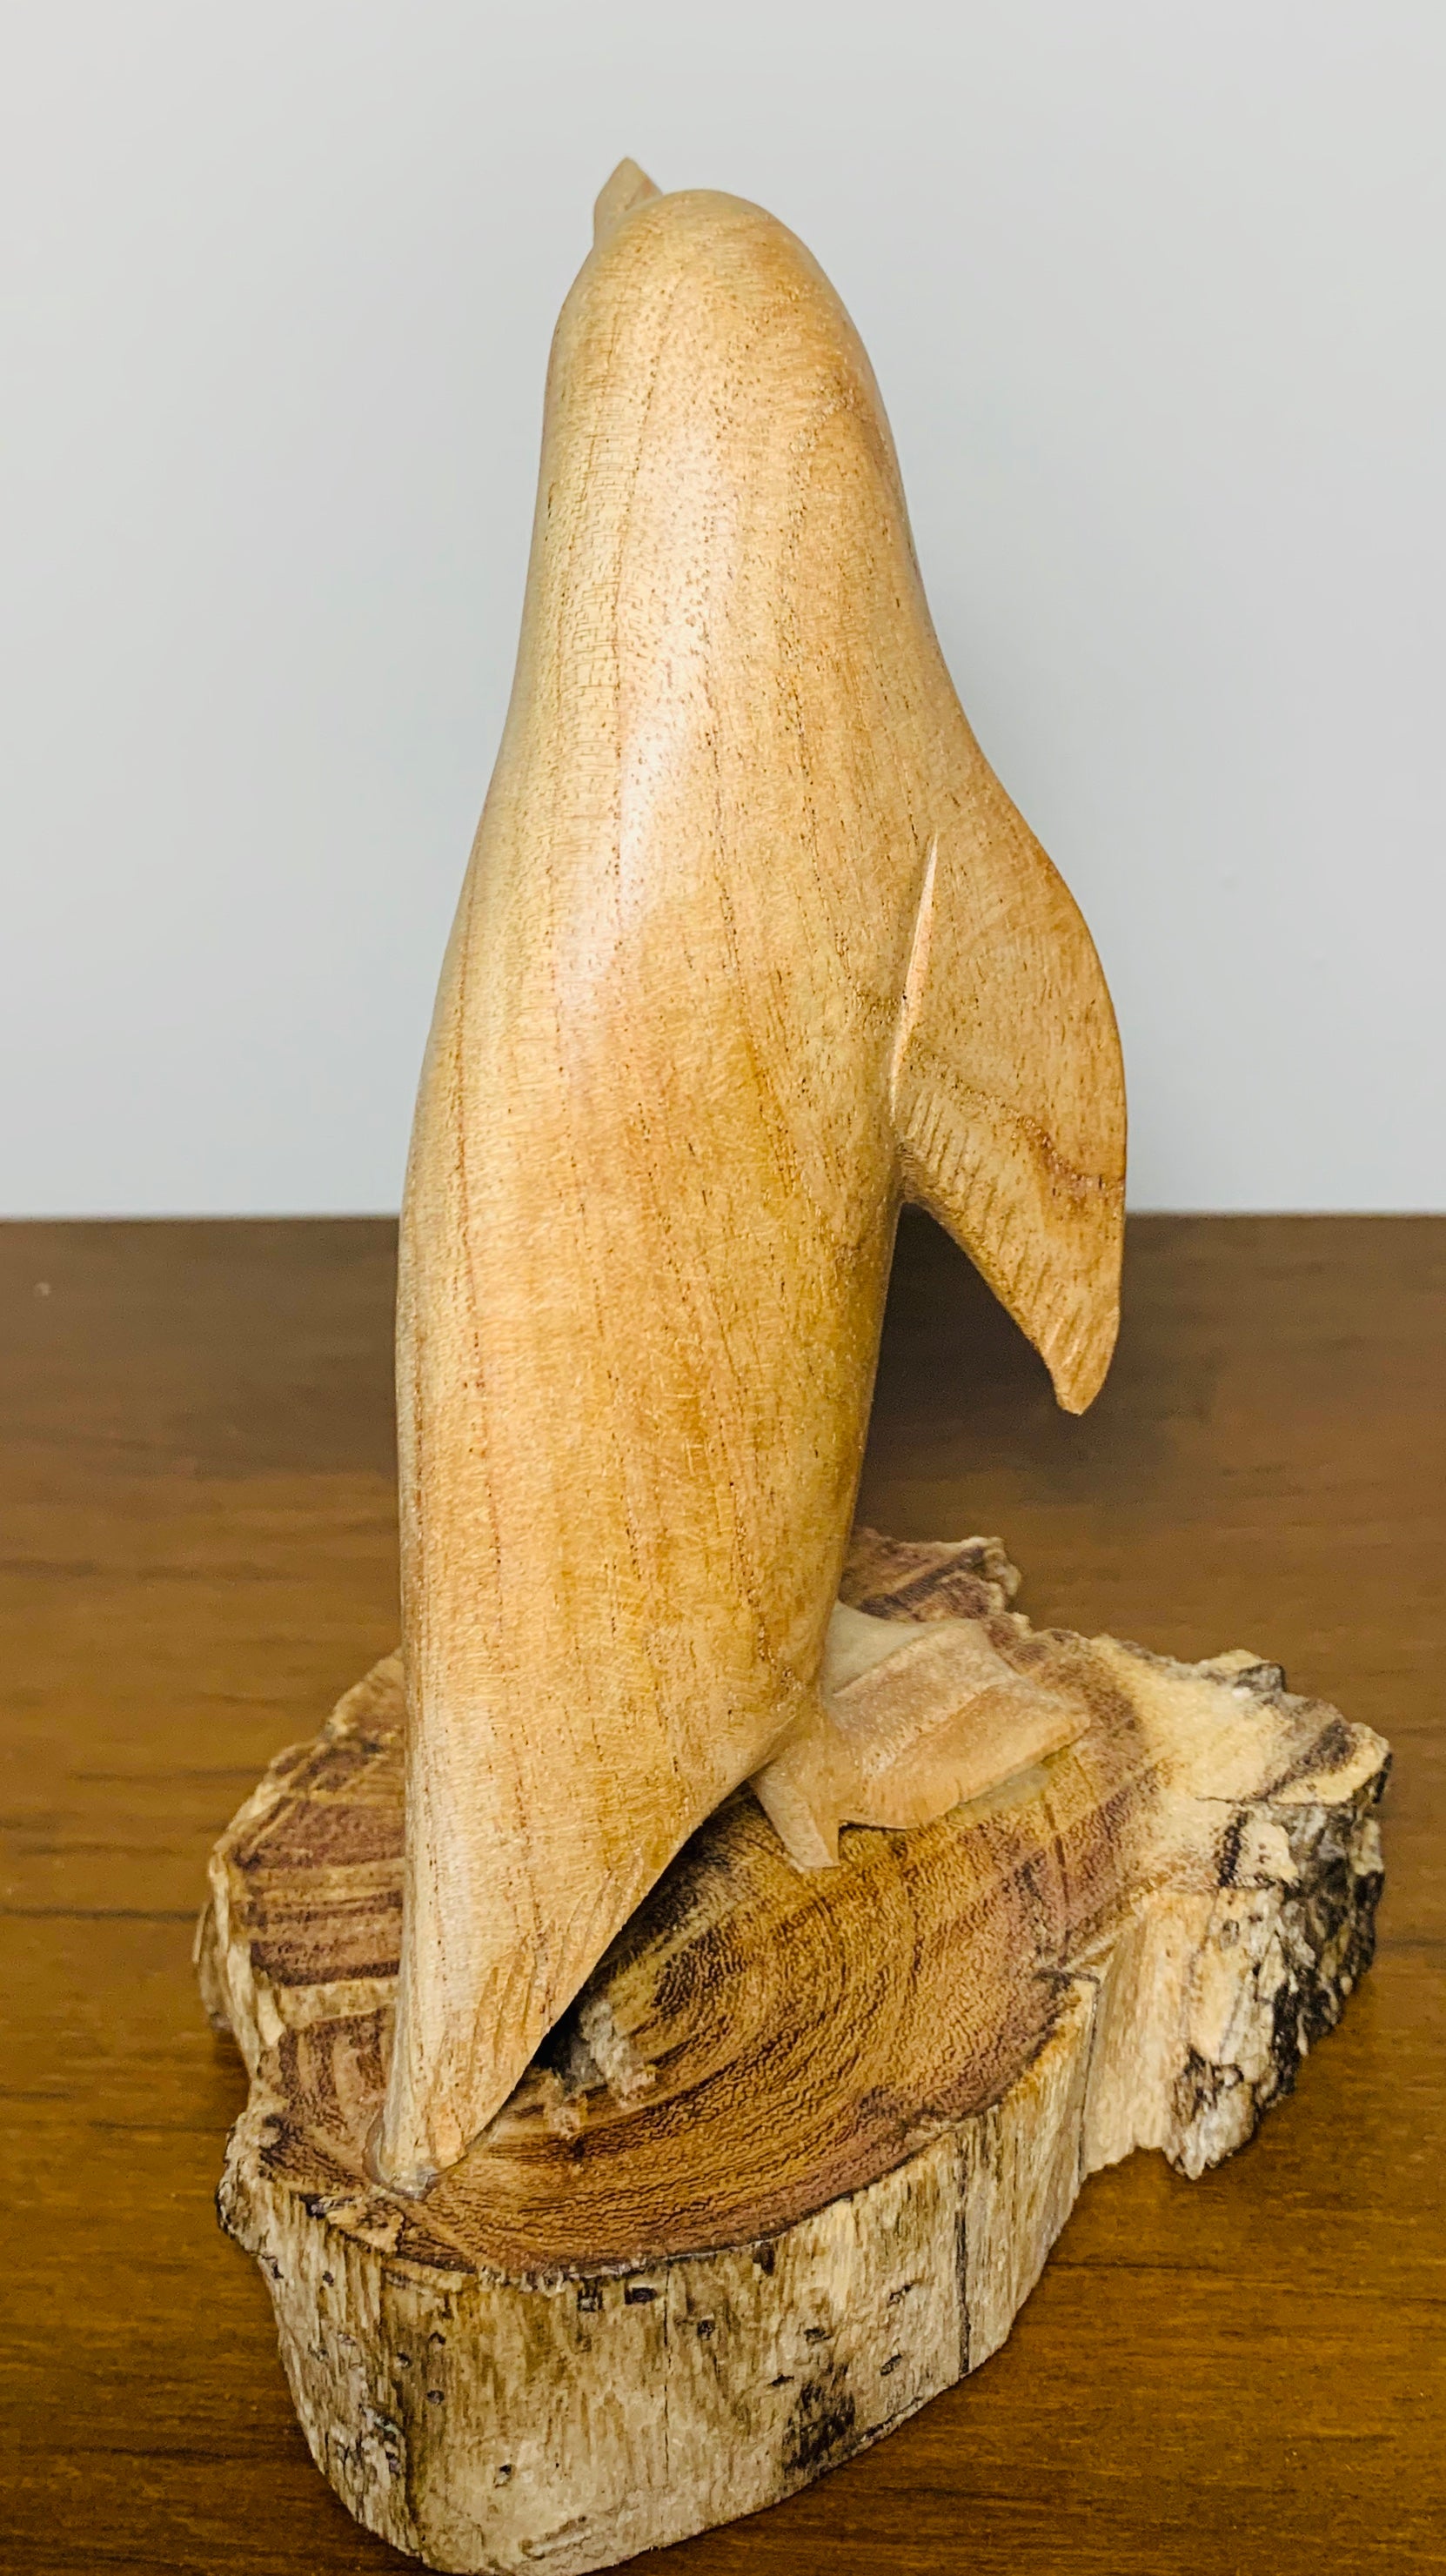 Penguin on Stand Wooden Carving